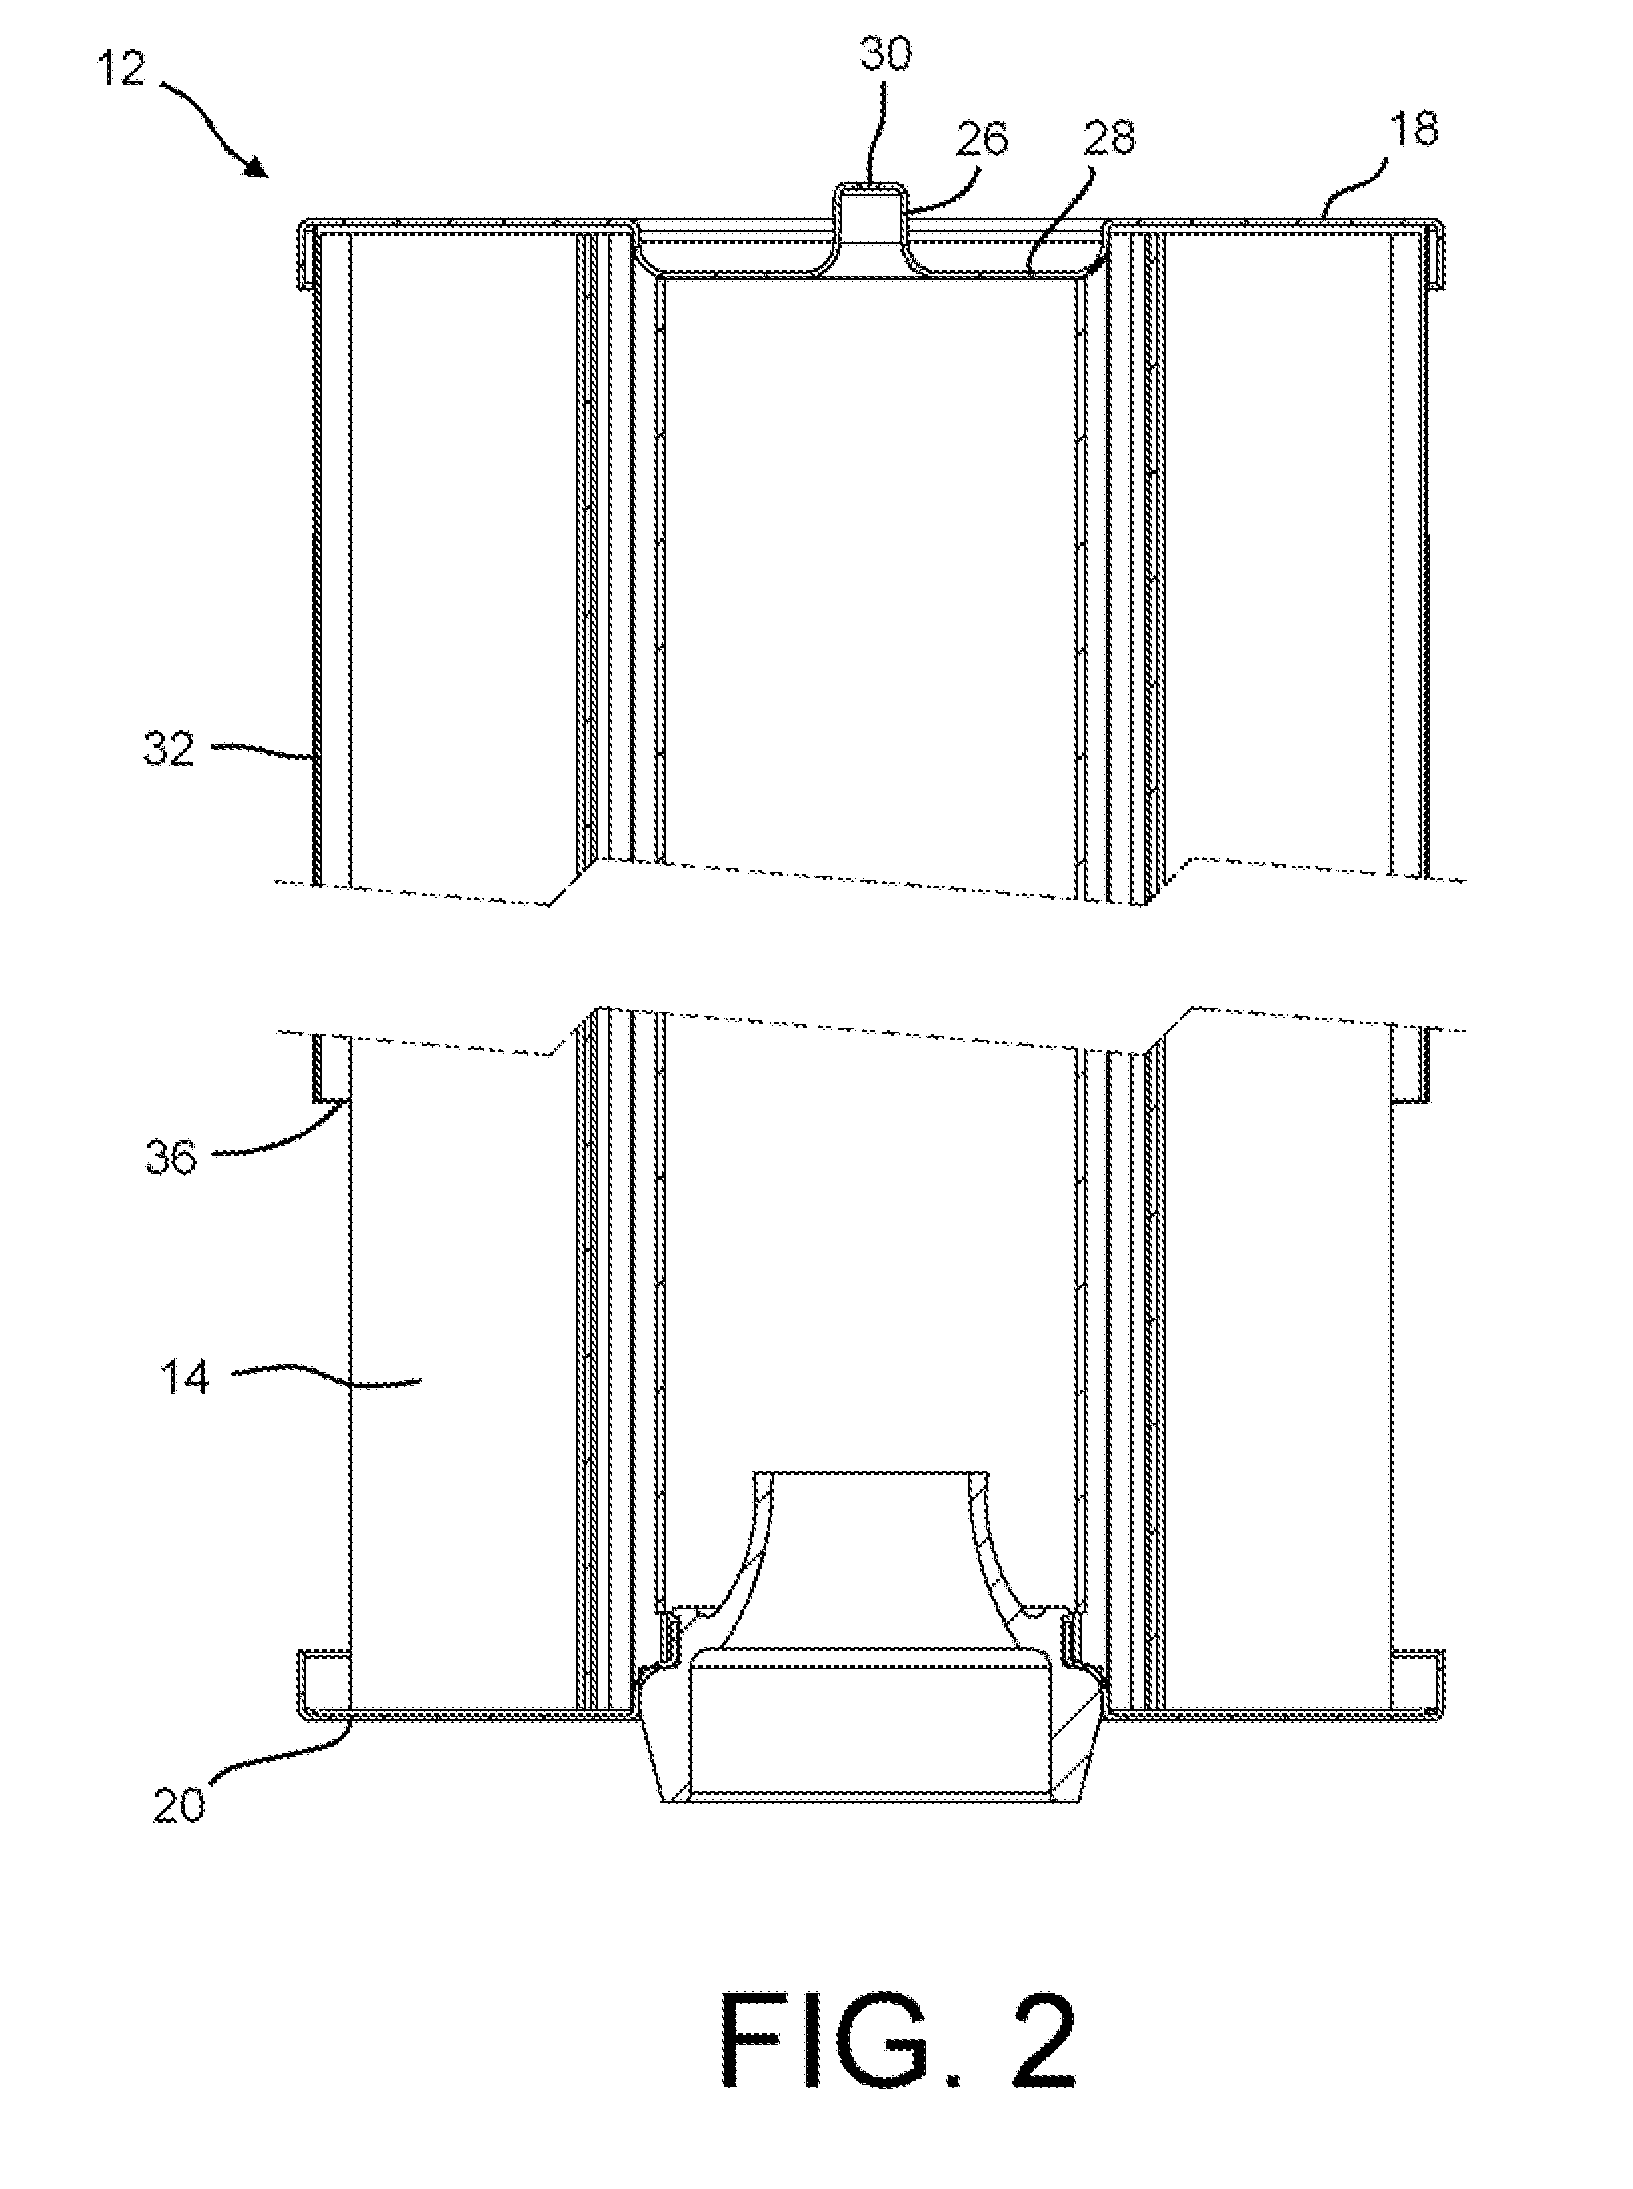 Filter Assembly with Modular Relief Valve Interface